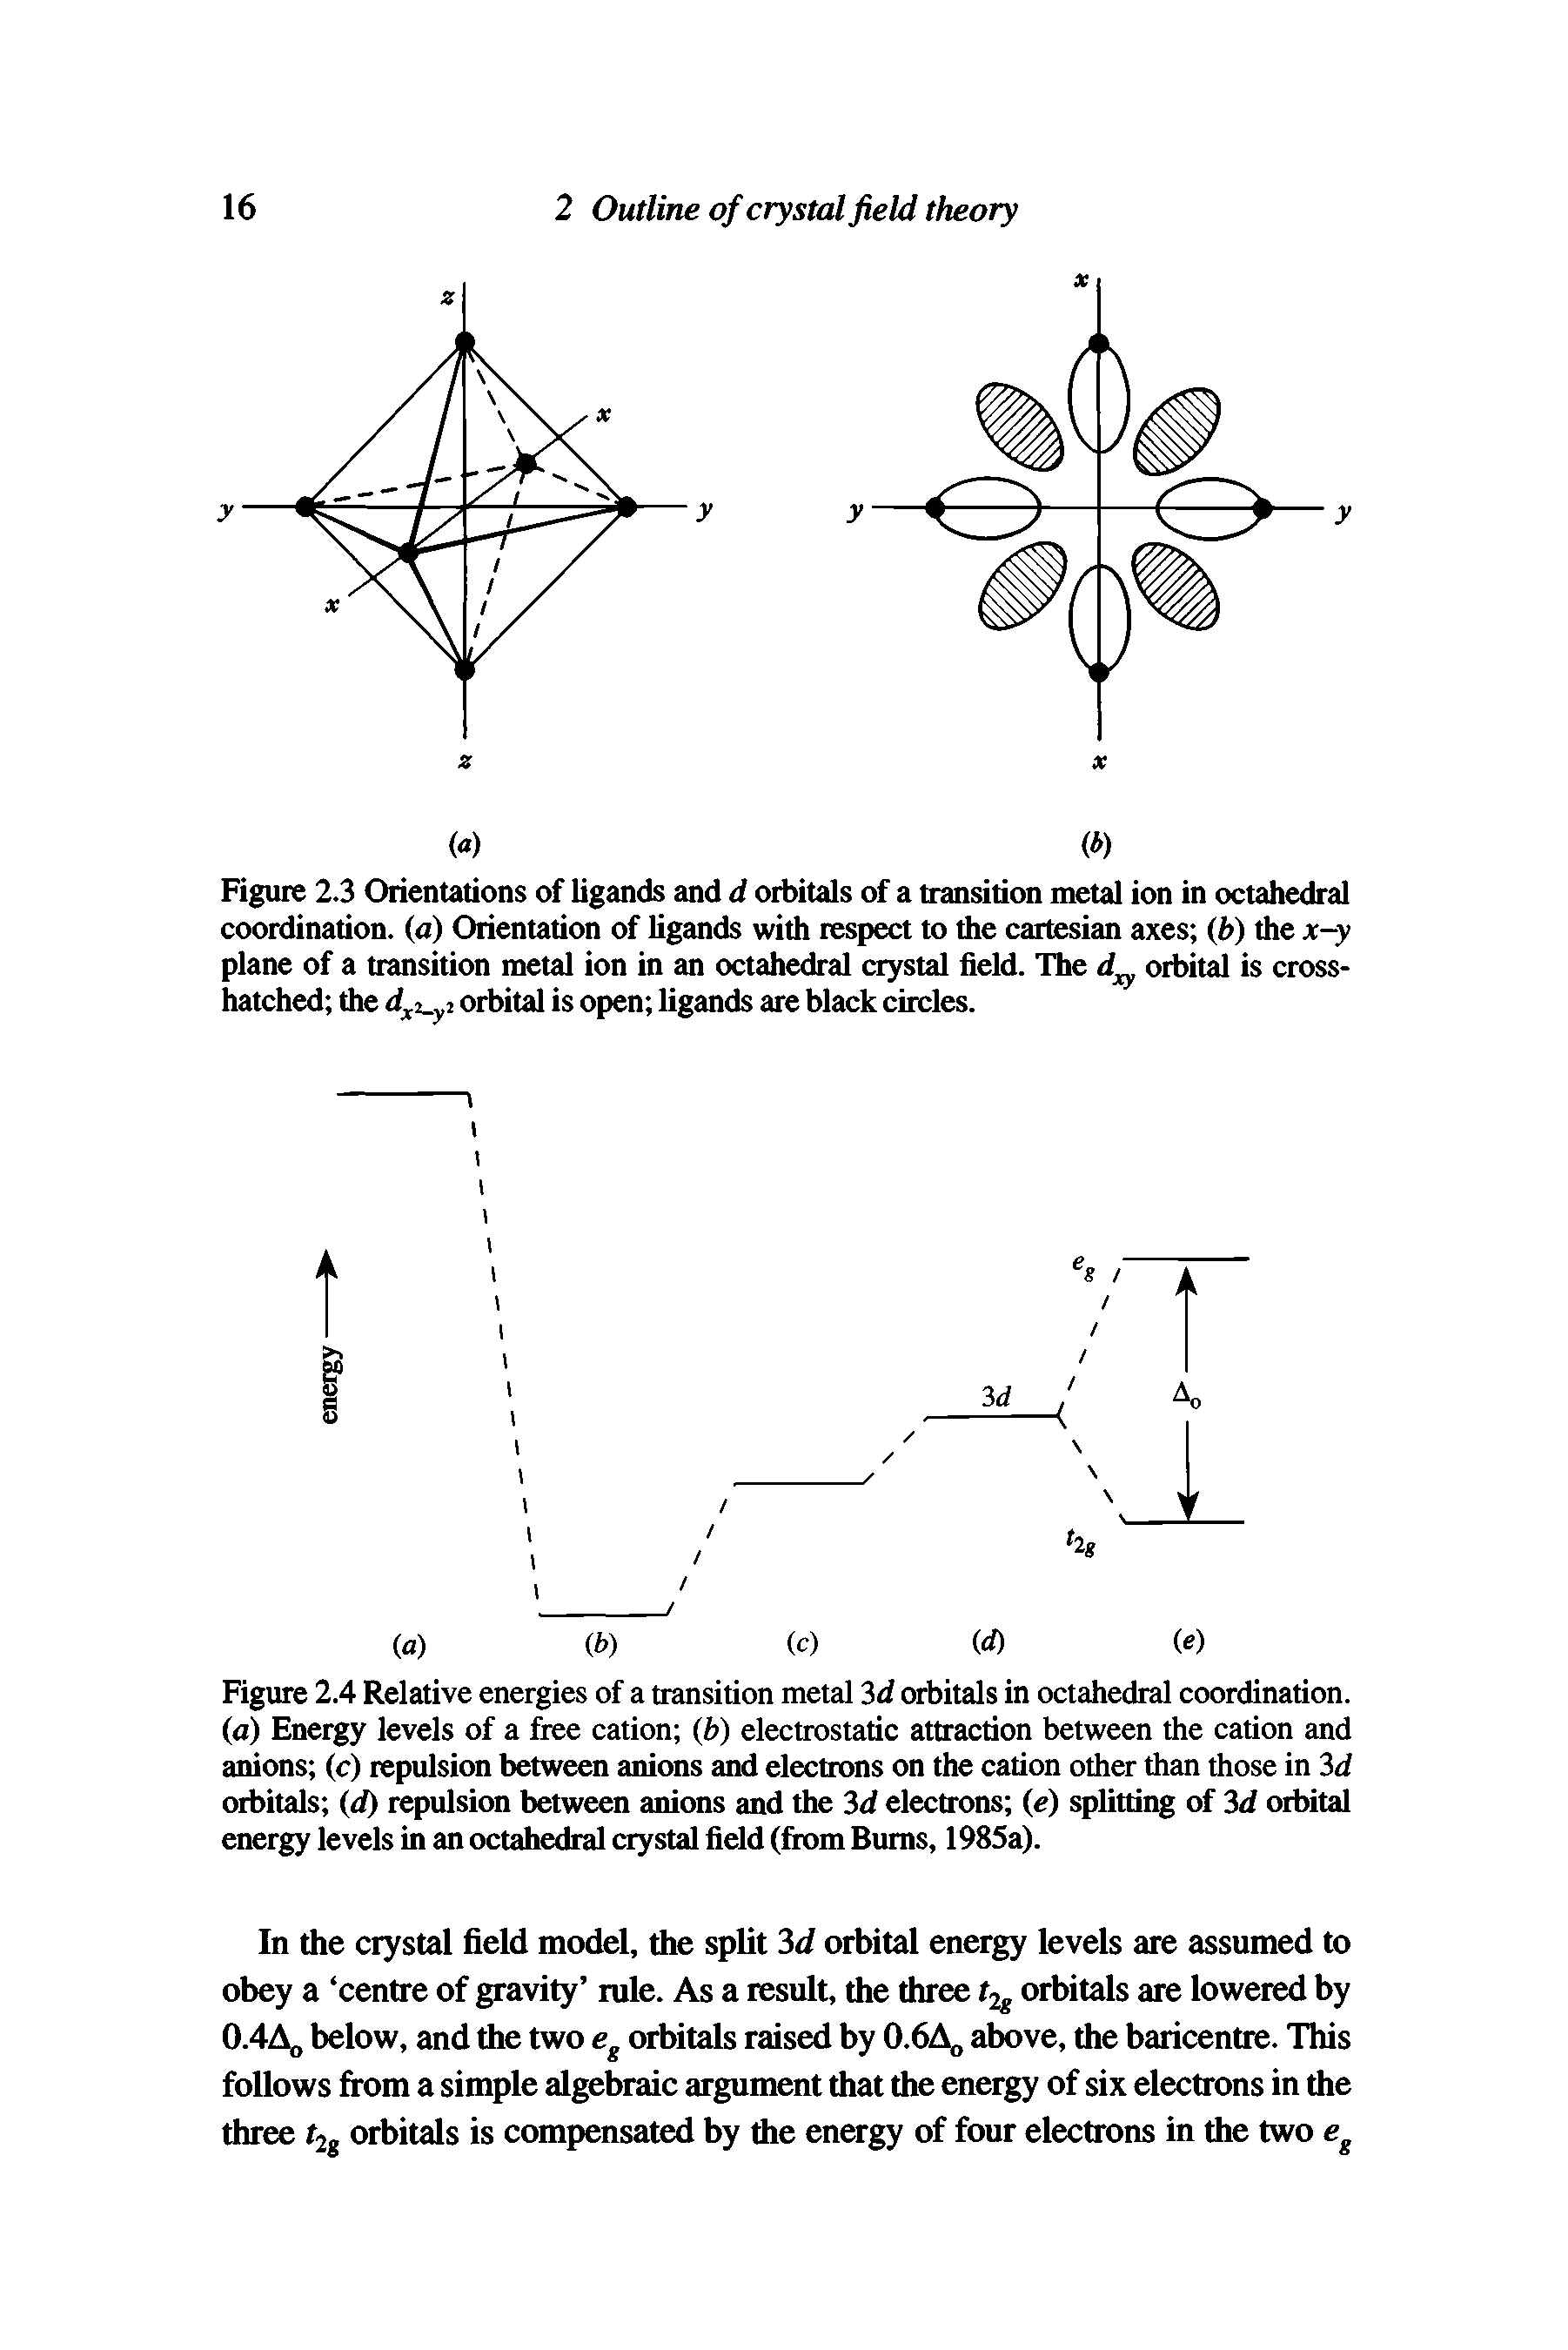 Figure 2.3 Orientations of ligands and d orbitals of a transition metal ion in octahedral coordination, (a) Orientation of ligands with respect to the cartesian axes (b) the x-y plane of a transition metal ion in an octahedral crystal field. The orbital is cross-hatched the dx2 y2 orbital is open ligands are black circles.